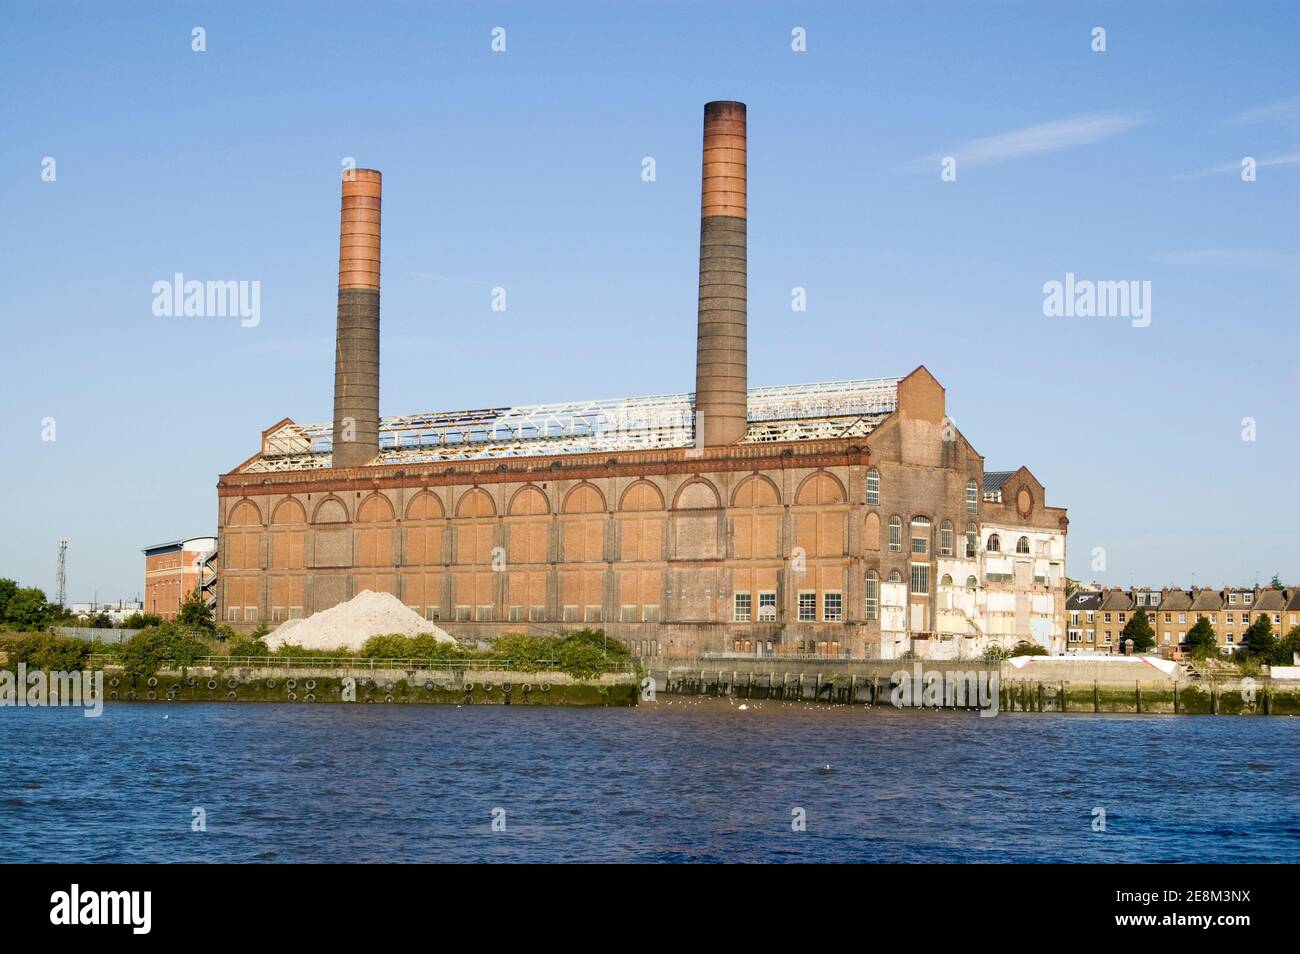 View across the River Thames towards the disused Lots Road Power Station in Chelsea. It used to provide energy for the London Underground. Stock Photo